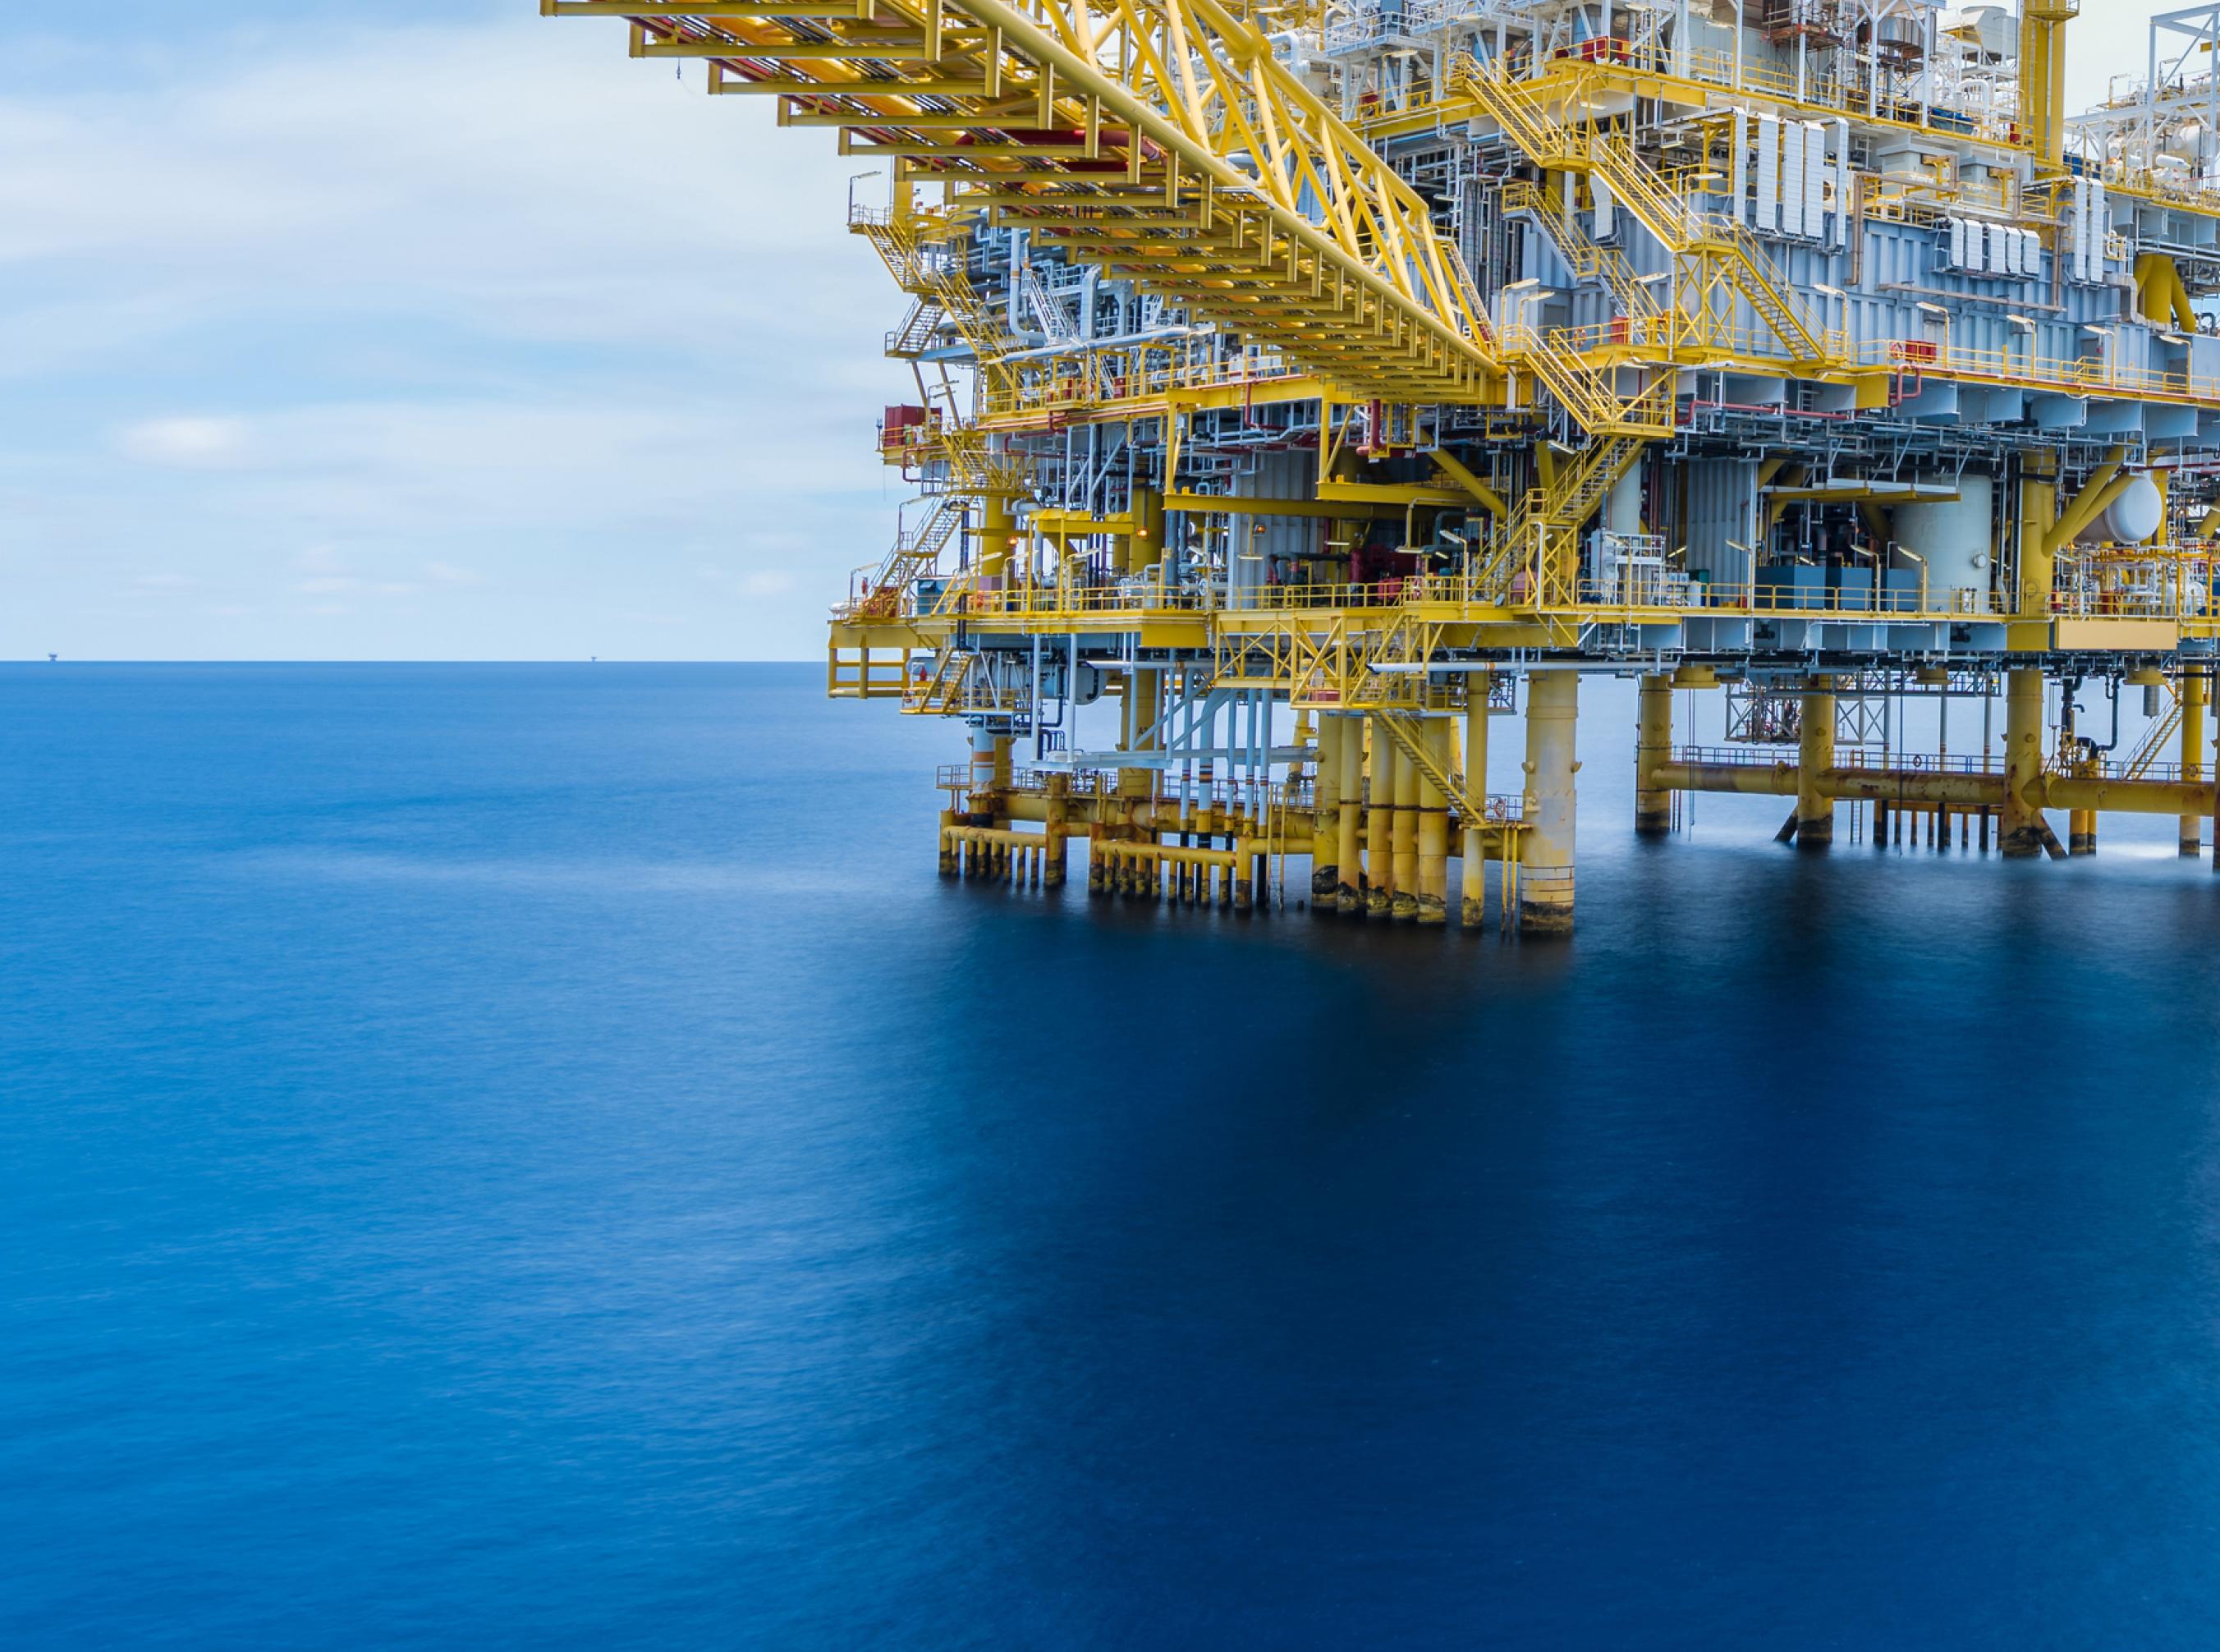 An offshore oil and gas rig